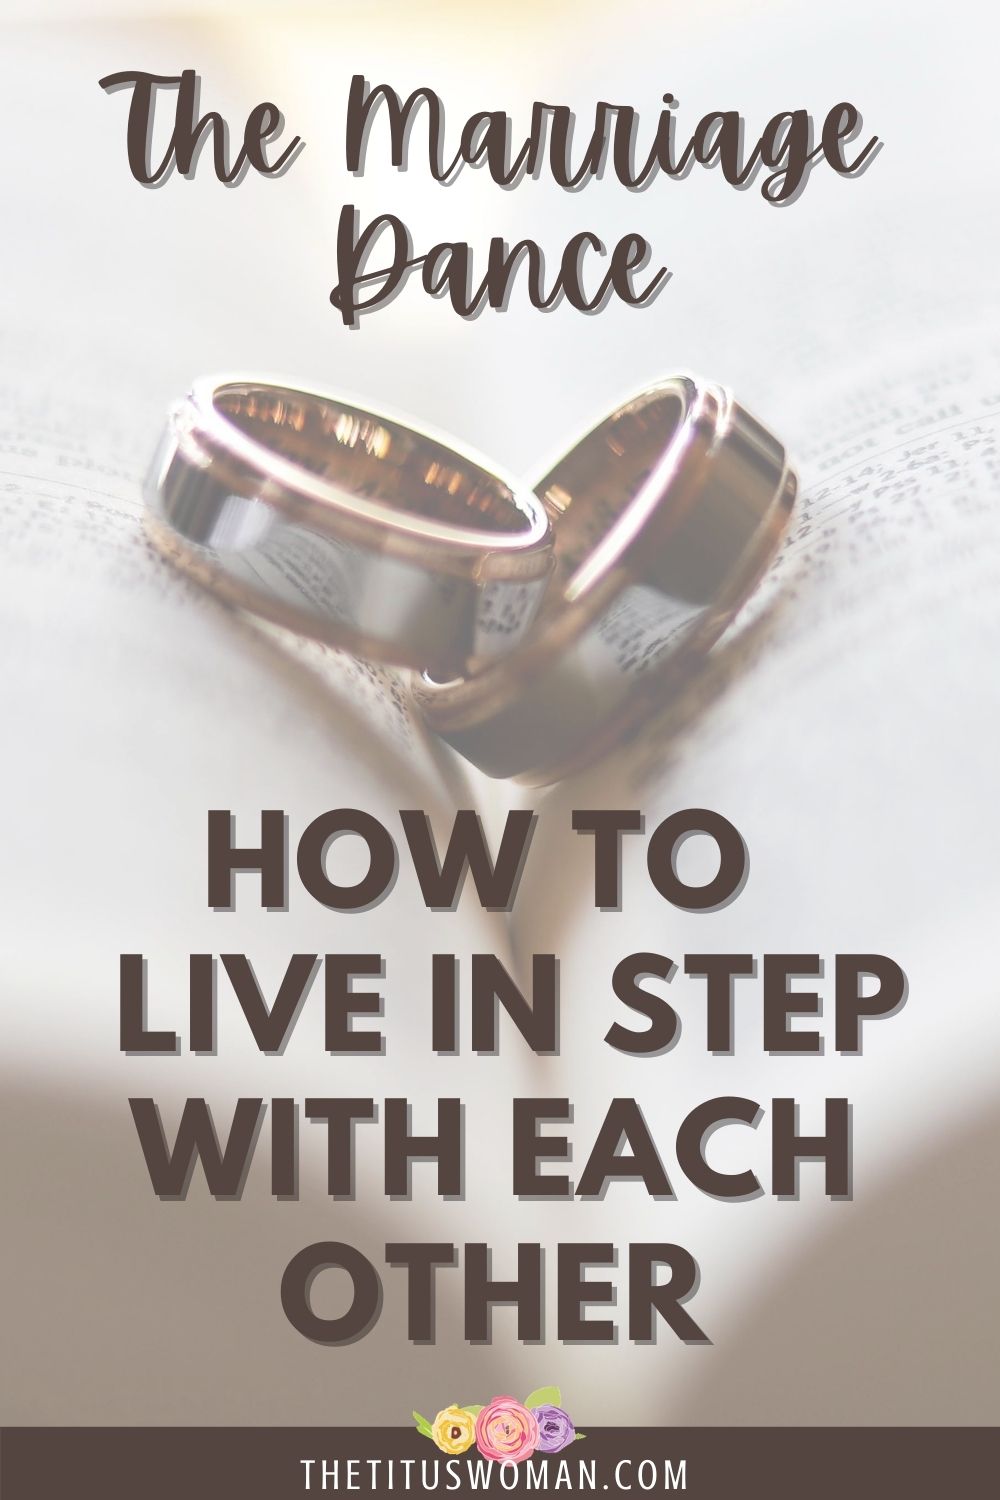 the marriage dance-how to live in step with each other